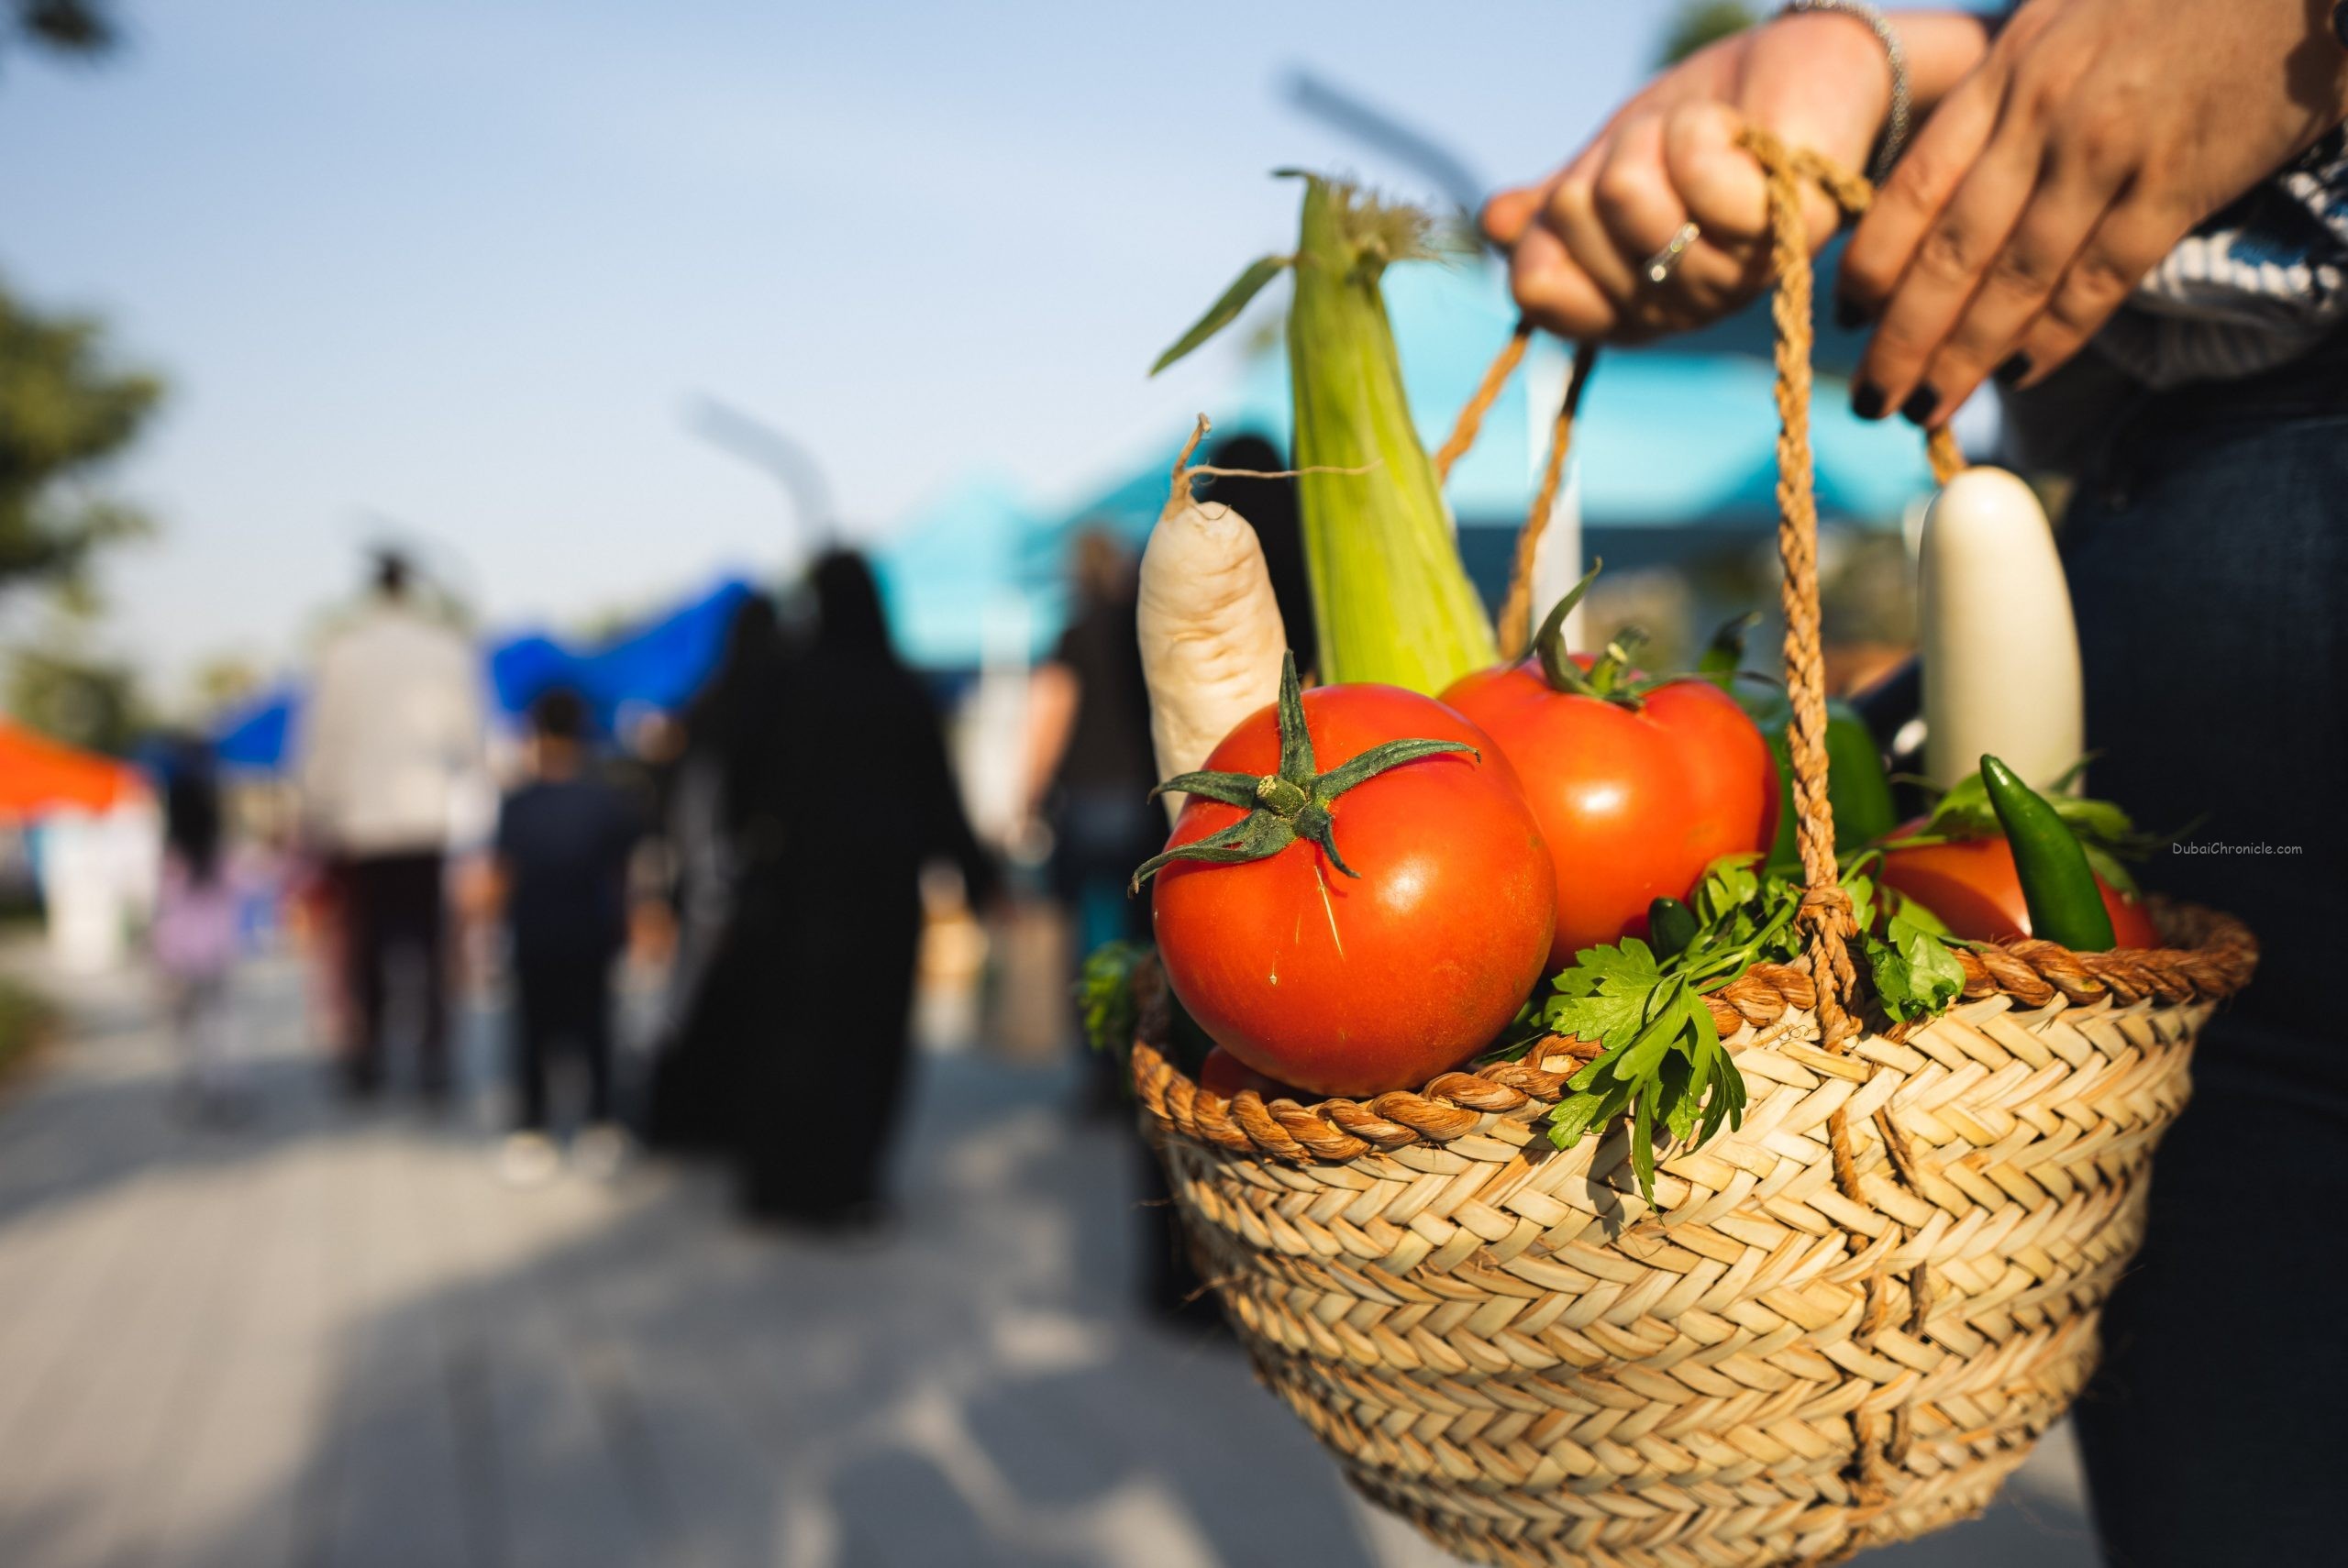 The Arada Foundation has announced the launch of a Ramadan initiative that will see 4,000 boxes of healthy, fresh produce picked straight from Emirati farms.